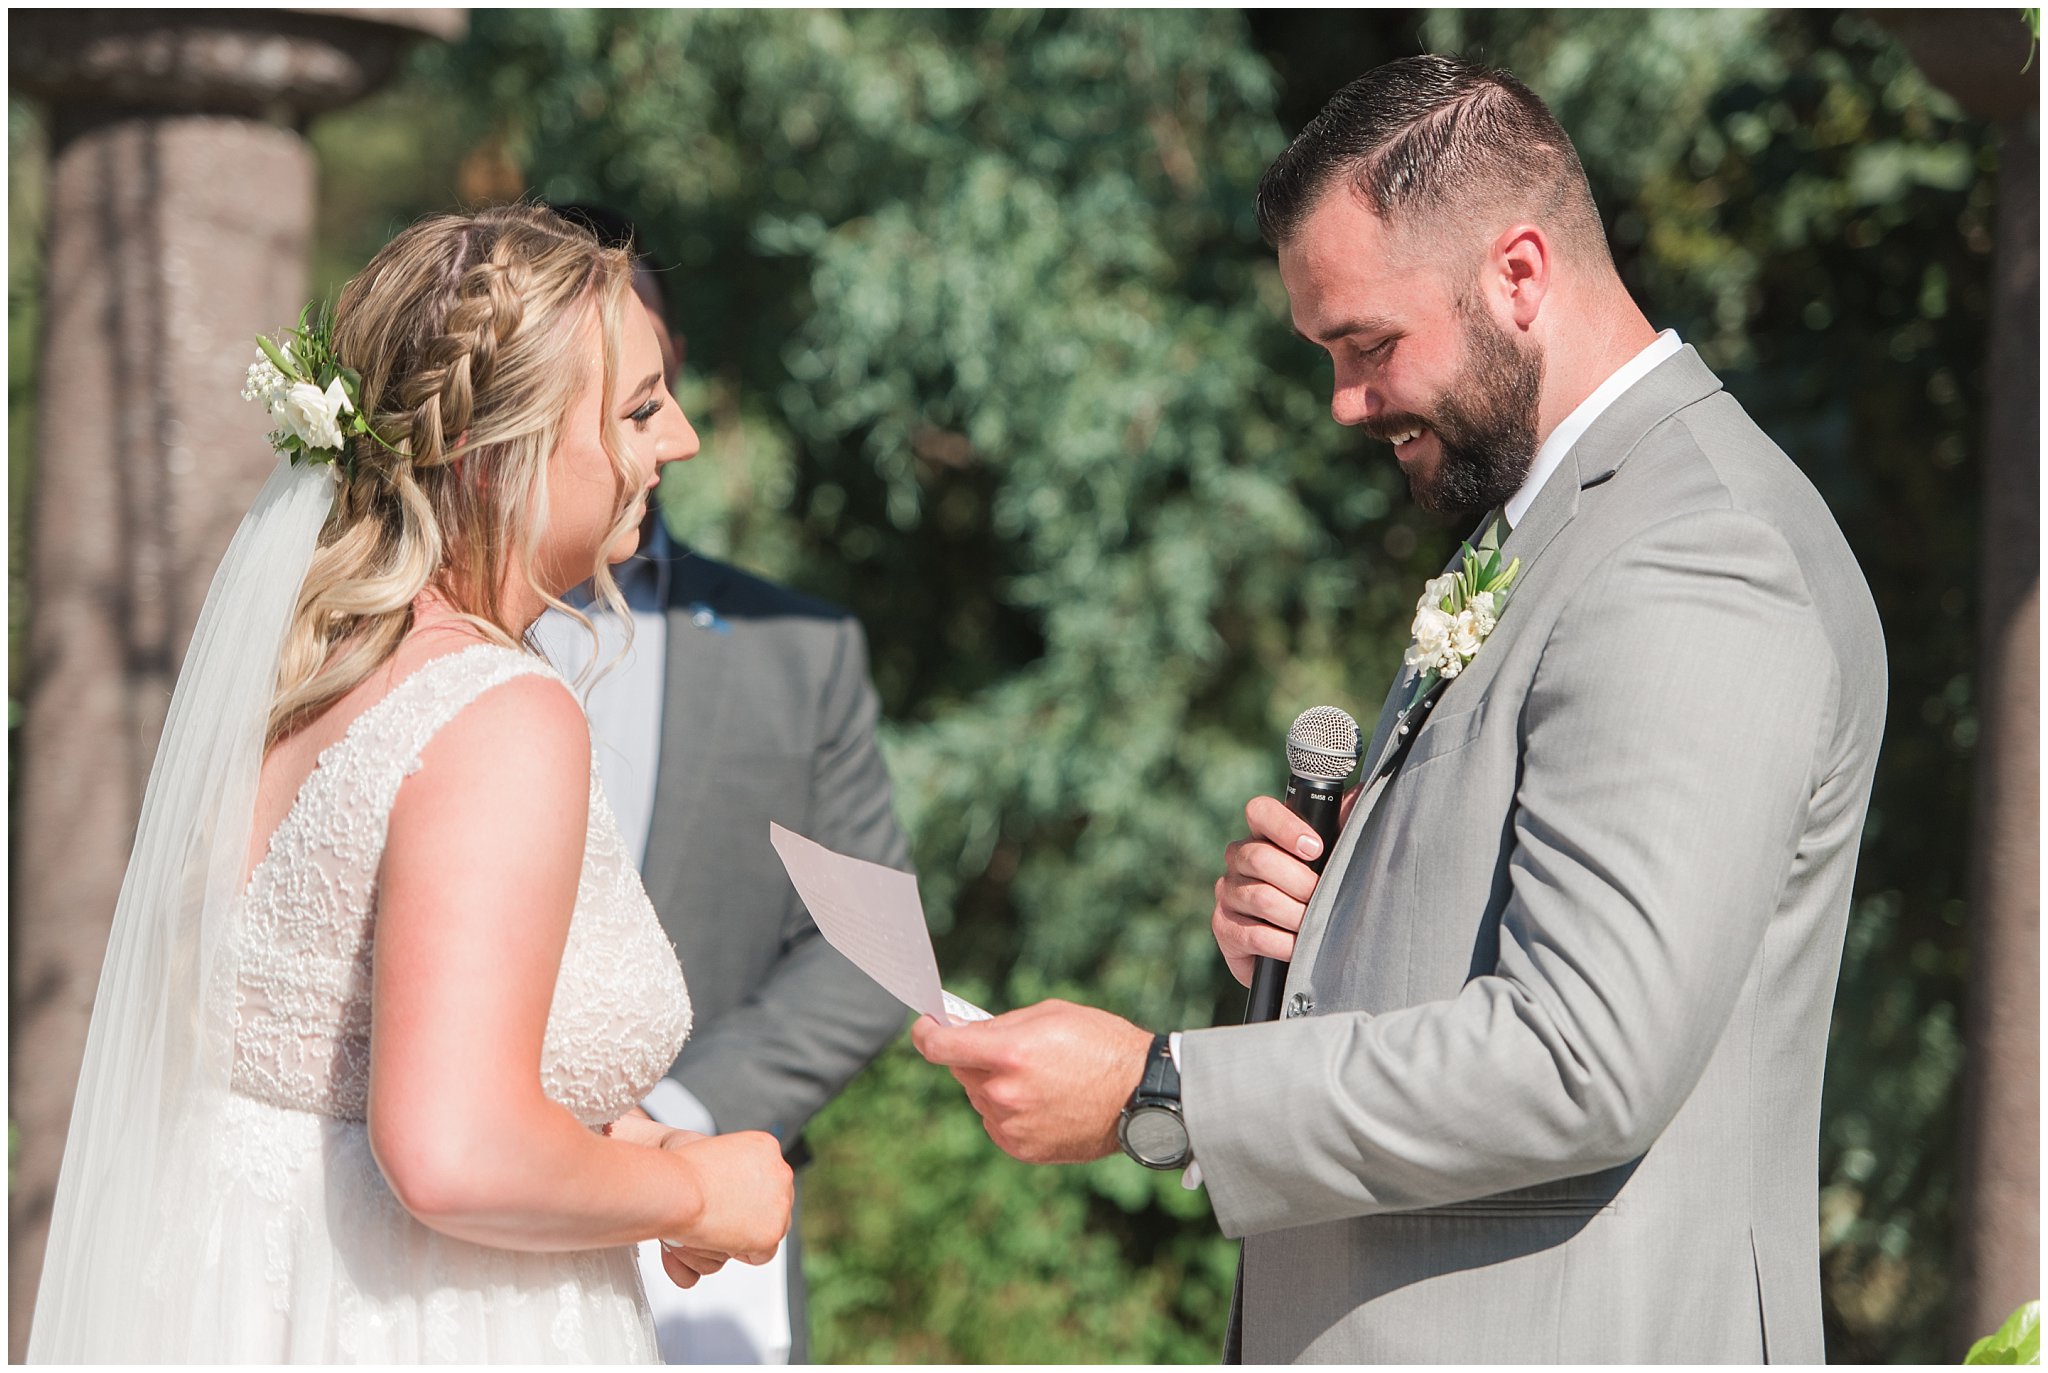 Ceremony at Oak Hills Utah with gray suits, sage green ties, and a champagne wedding dress | Sage Green and Gray Summer Wedding at Oak Hills | Jessie and Dallin Photography